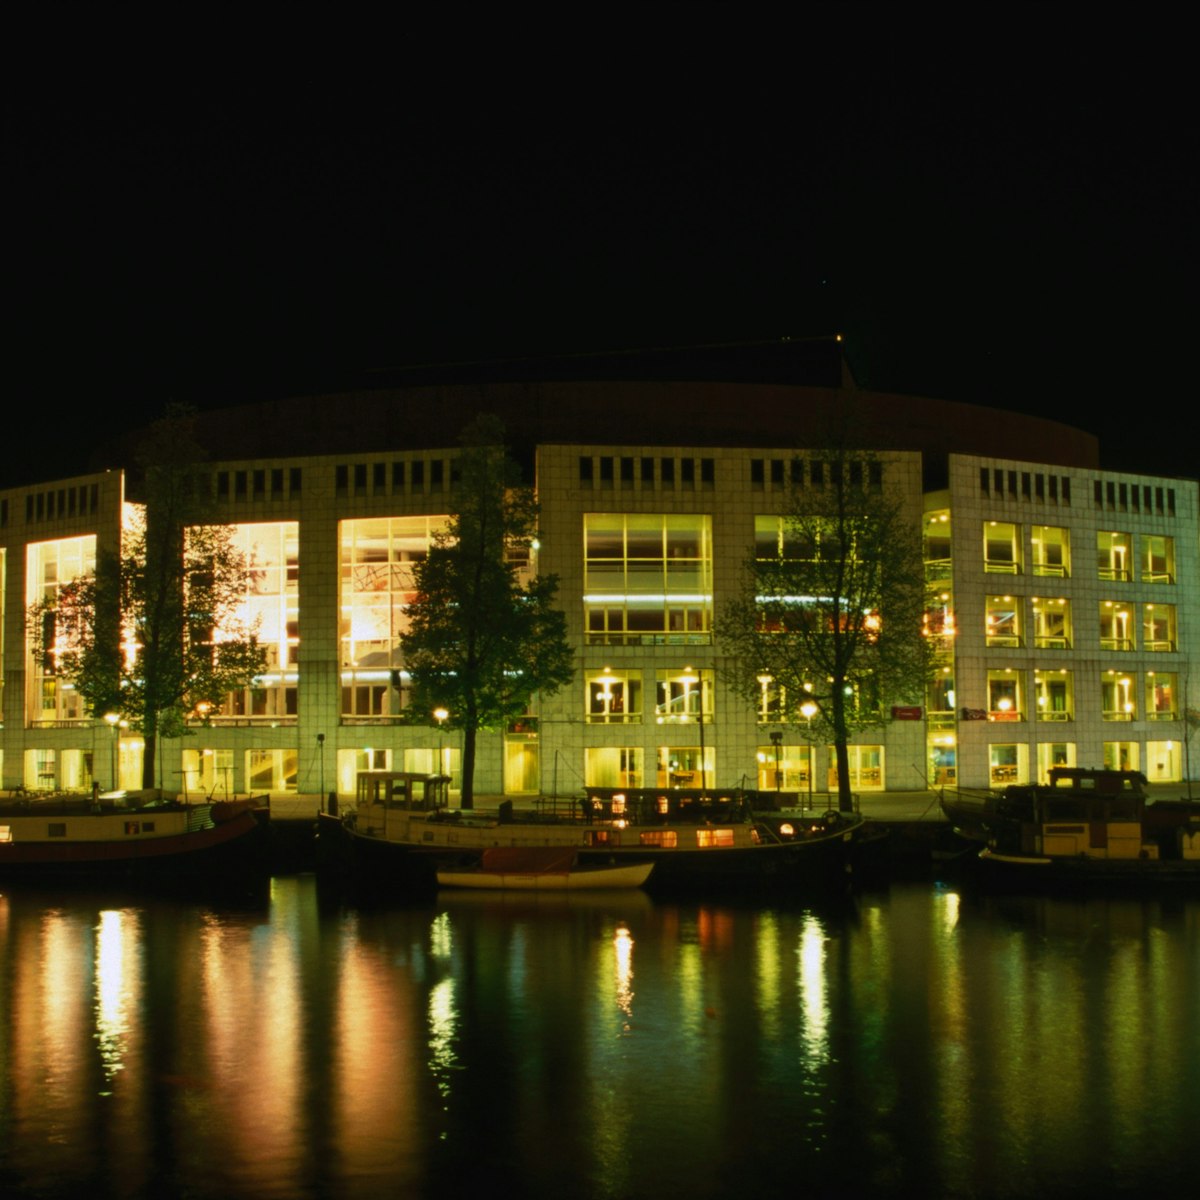 The Stopera, a City Hall and music theatre on Waterlooplein by the Binnen Amstel, at night.